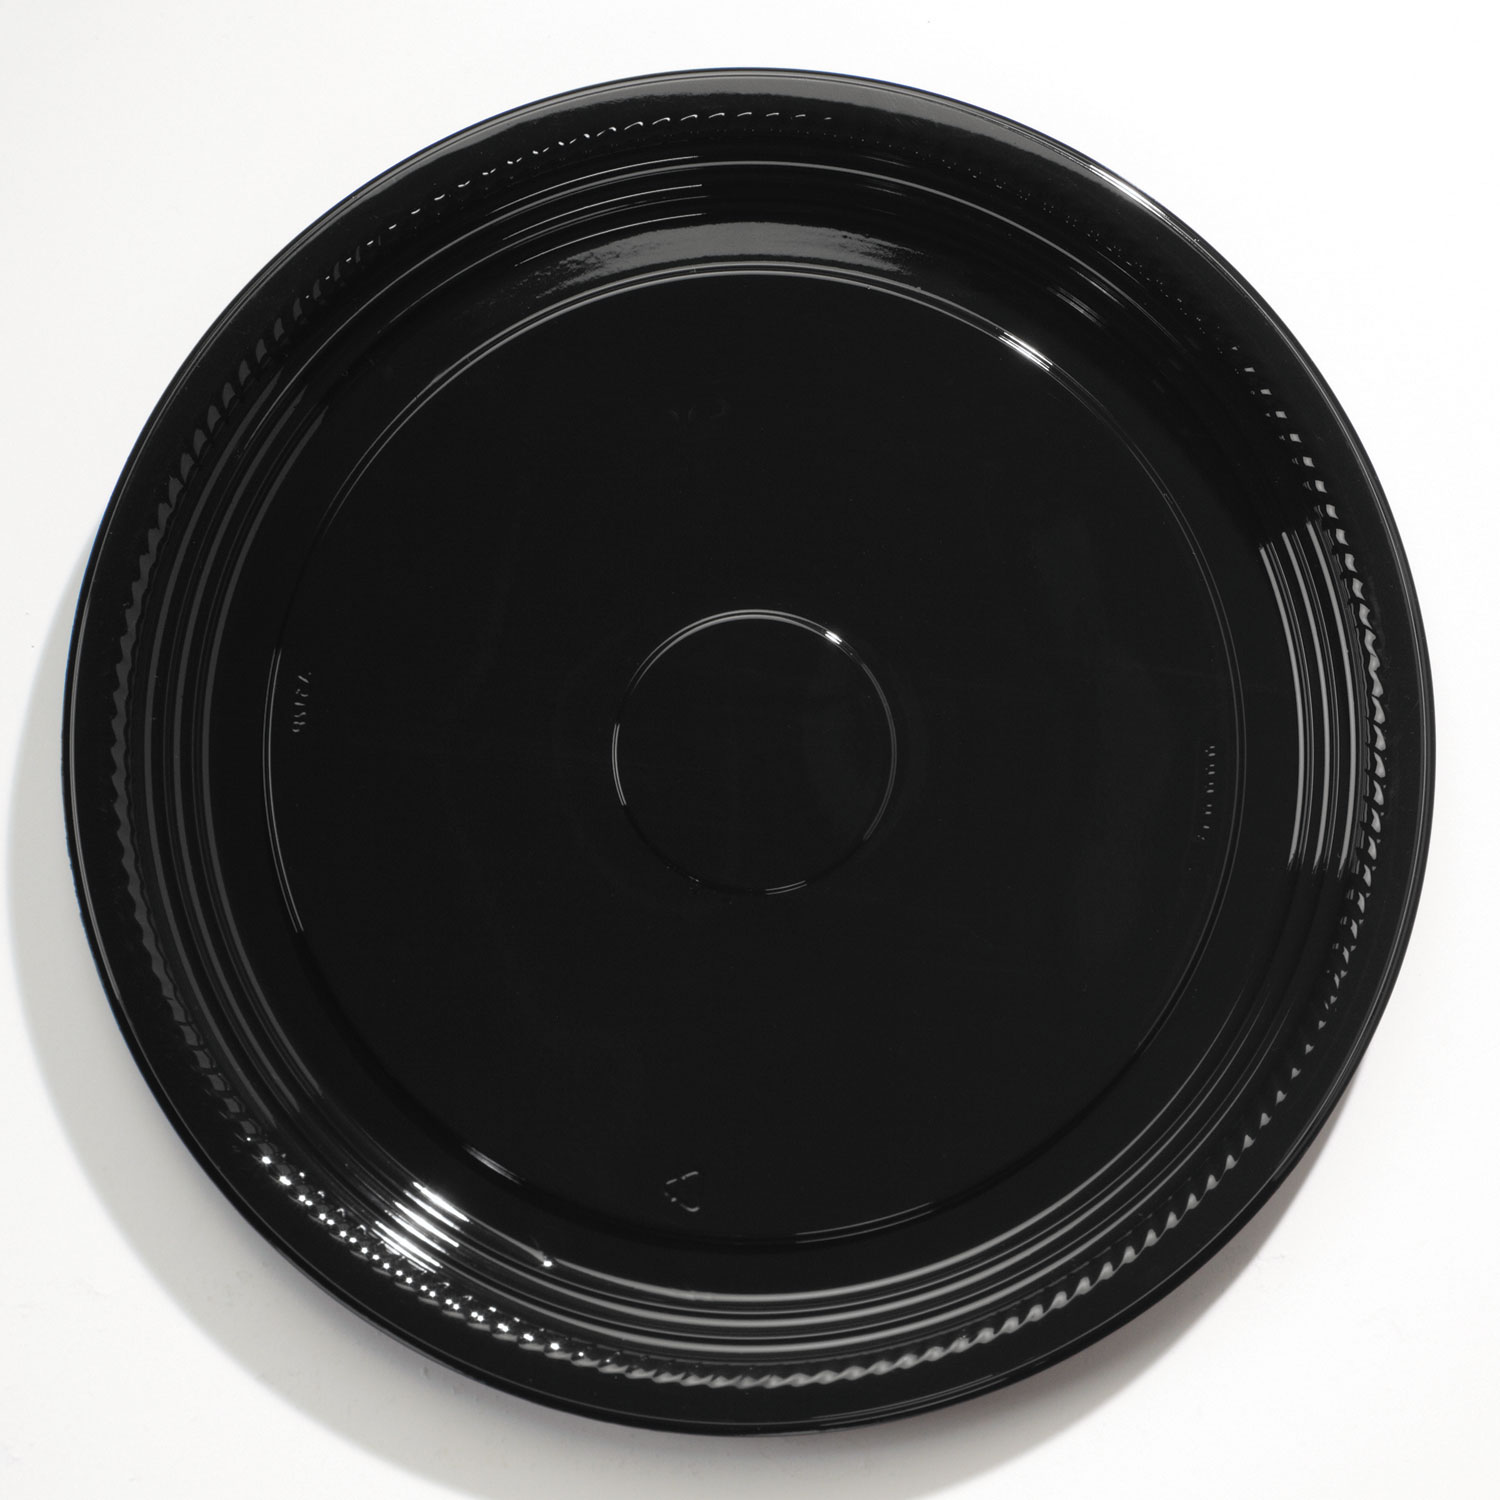  WNA WNA A516PBL Caterline Casuals Thermoformed Platters, PET, Black, 16 Diameter (WNAA516PBL) 